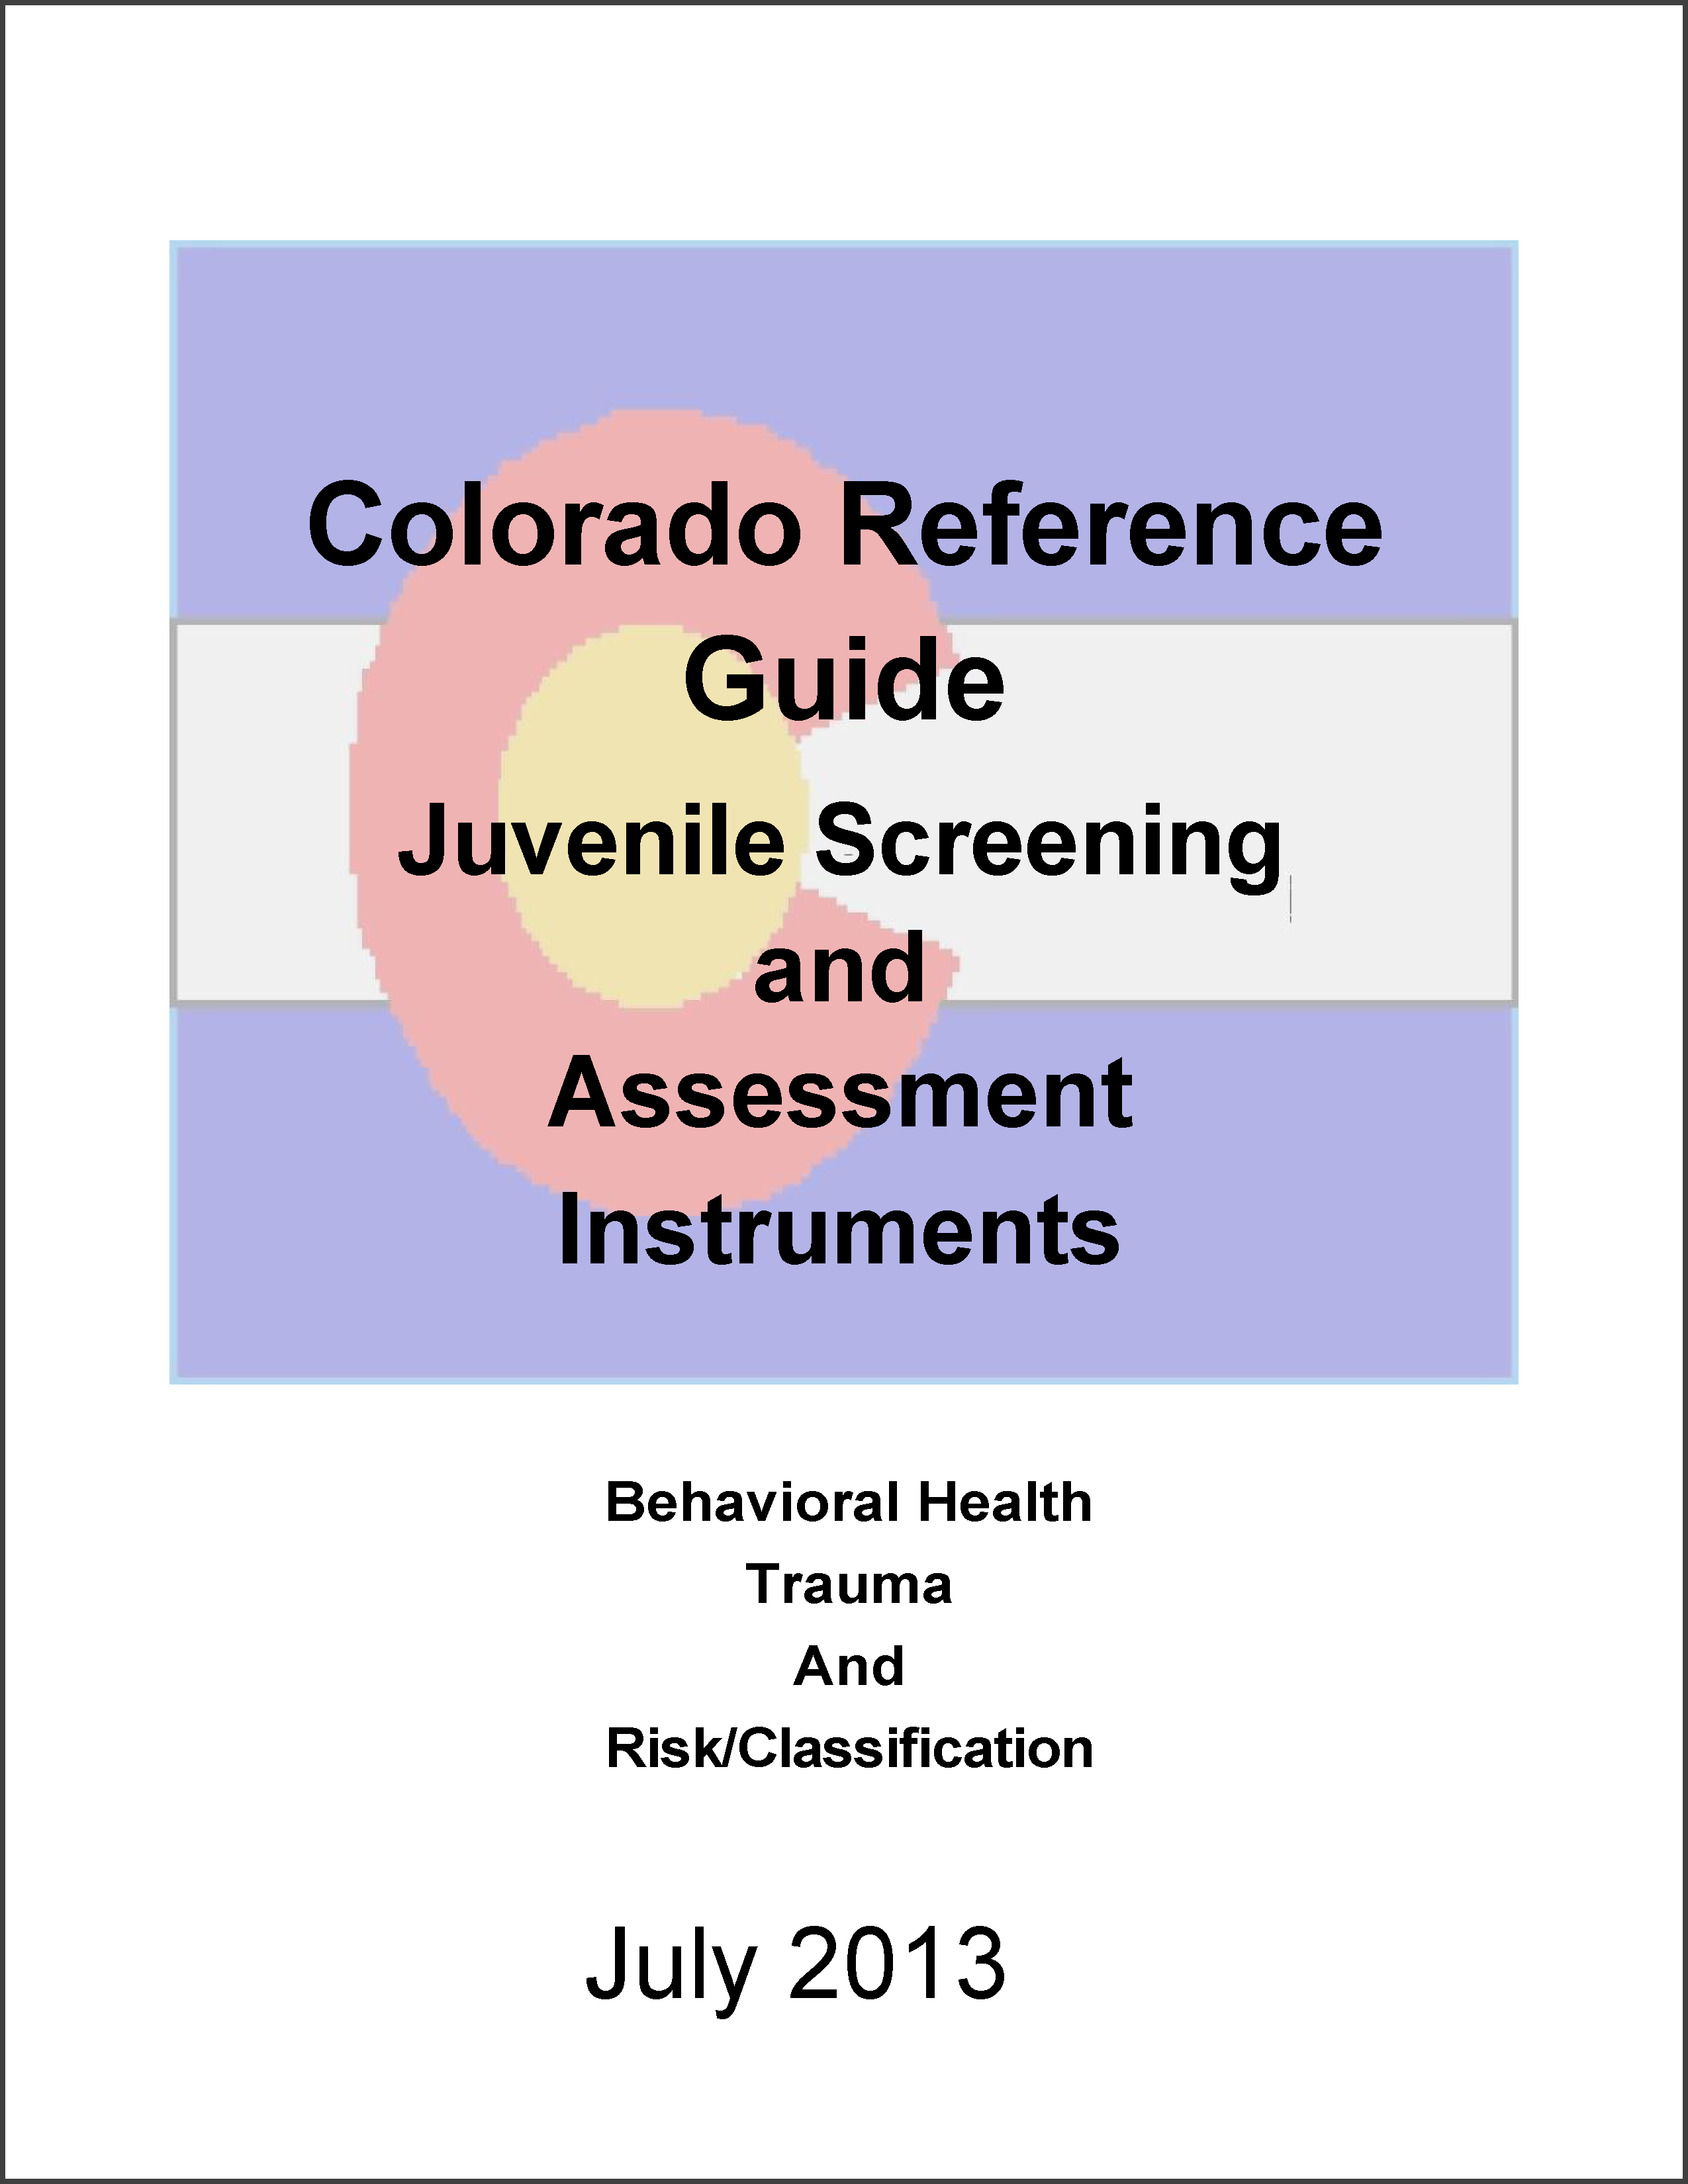 Colorado Reference Guide: Juvenile Screening and Assessment Instruments (July 2013)